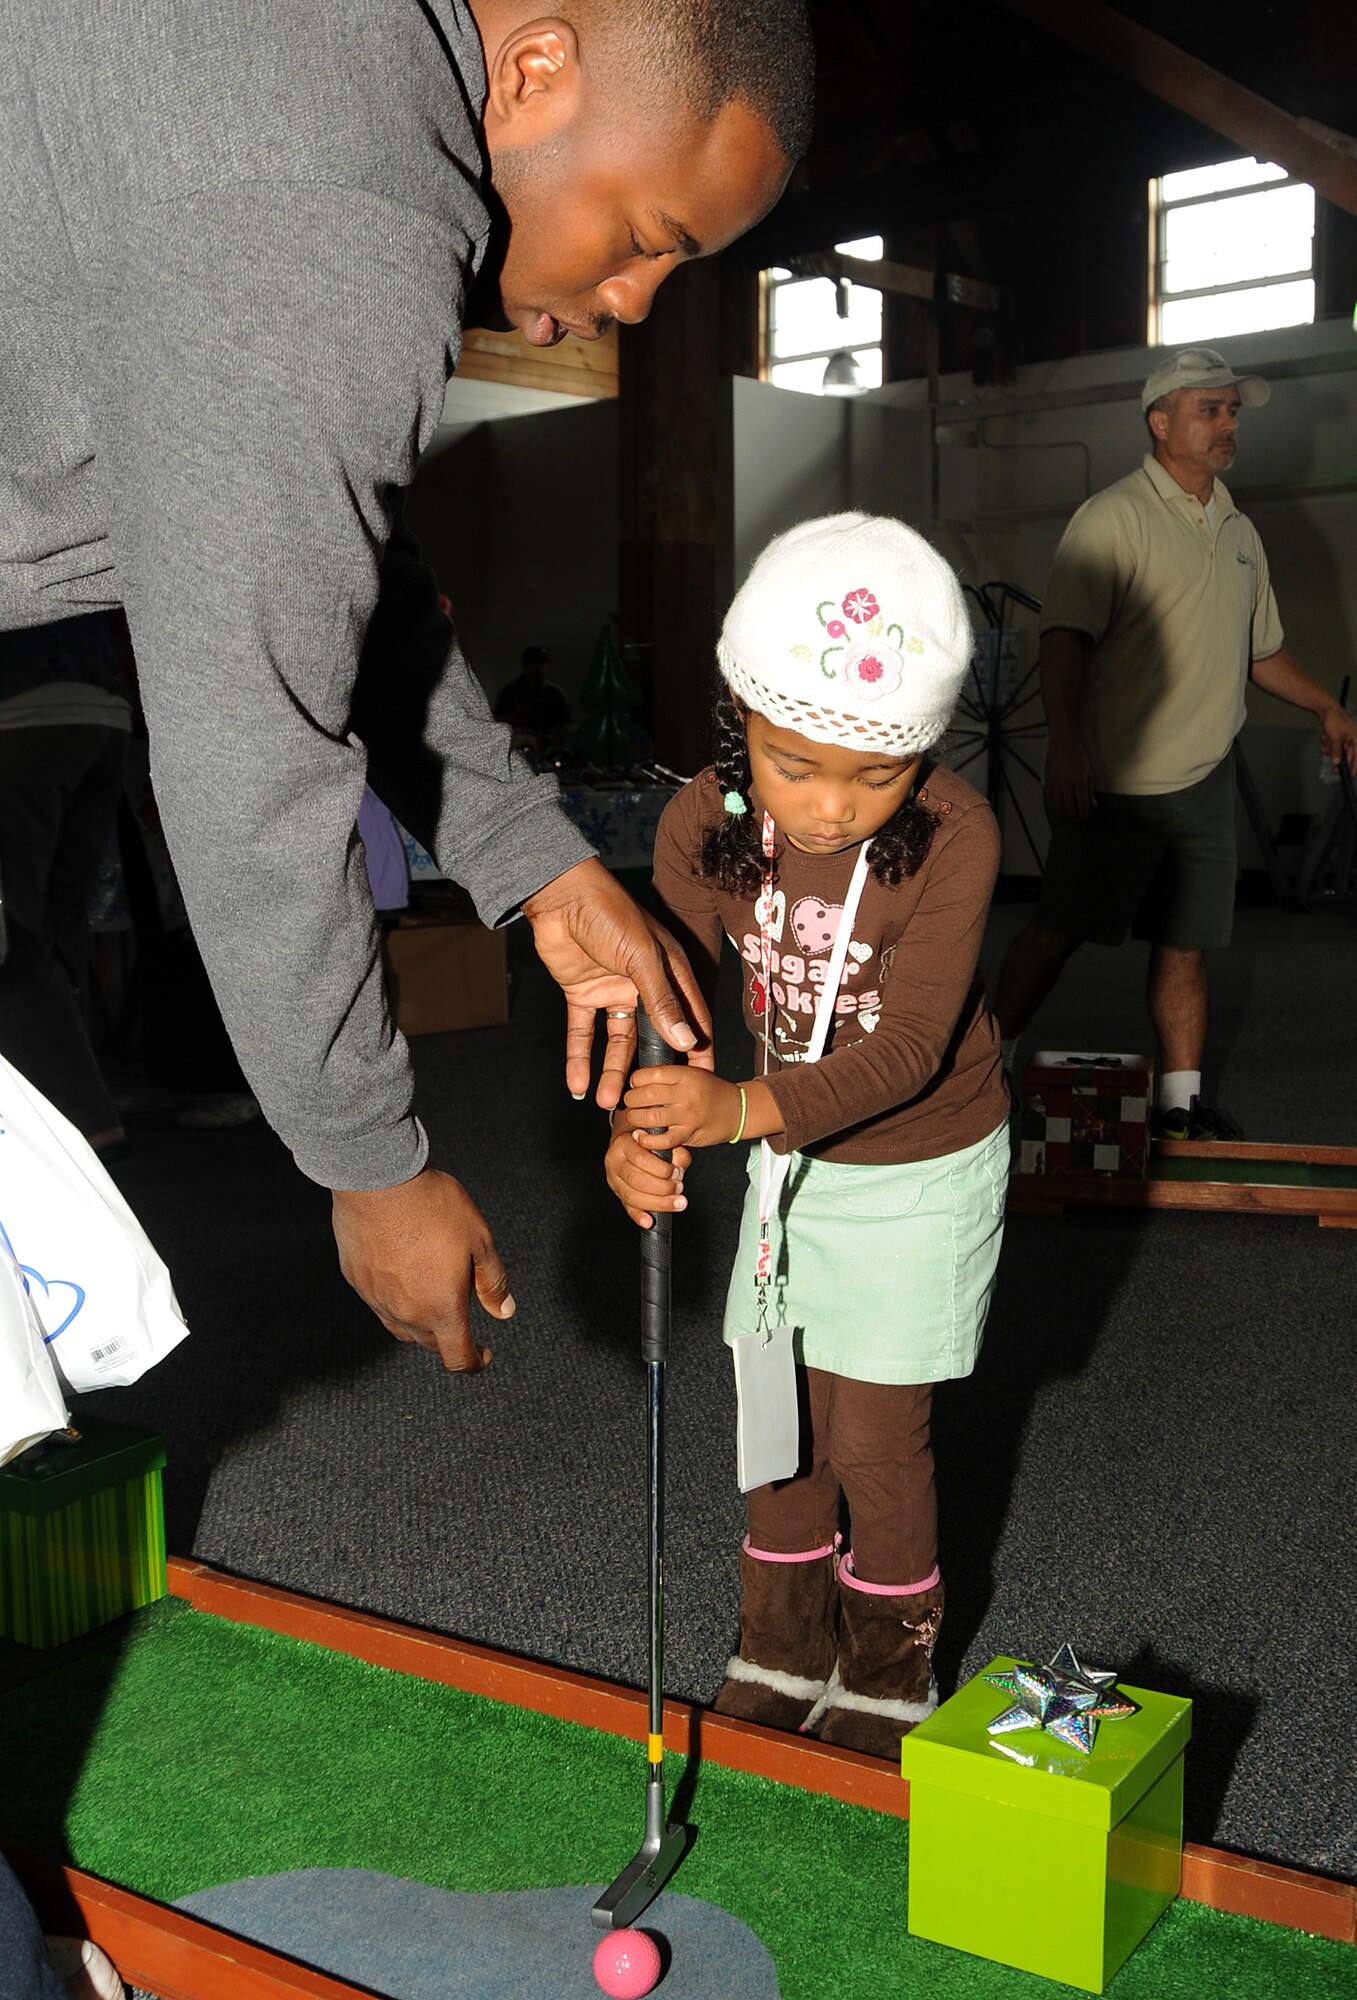 Lilie Donold gets some assistance from her father, Courtney, with her shots at a miniature golf game during the “Candy Land” children’s holiday celebration at Fort MacArthur Hall, San Pedro, Calif., Dec. 12.  Los Angeles Air Force Base’s Youth Programs provided food, fun and games for children ages 2-11. (Photo by Joe Juarez)